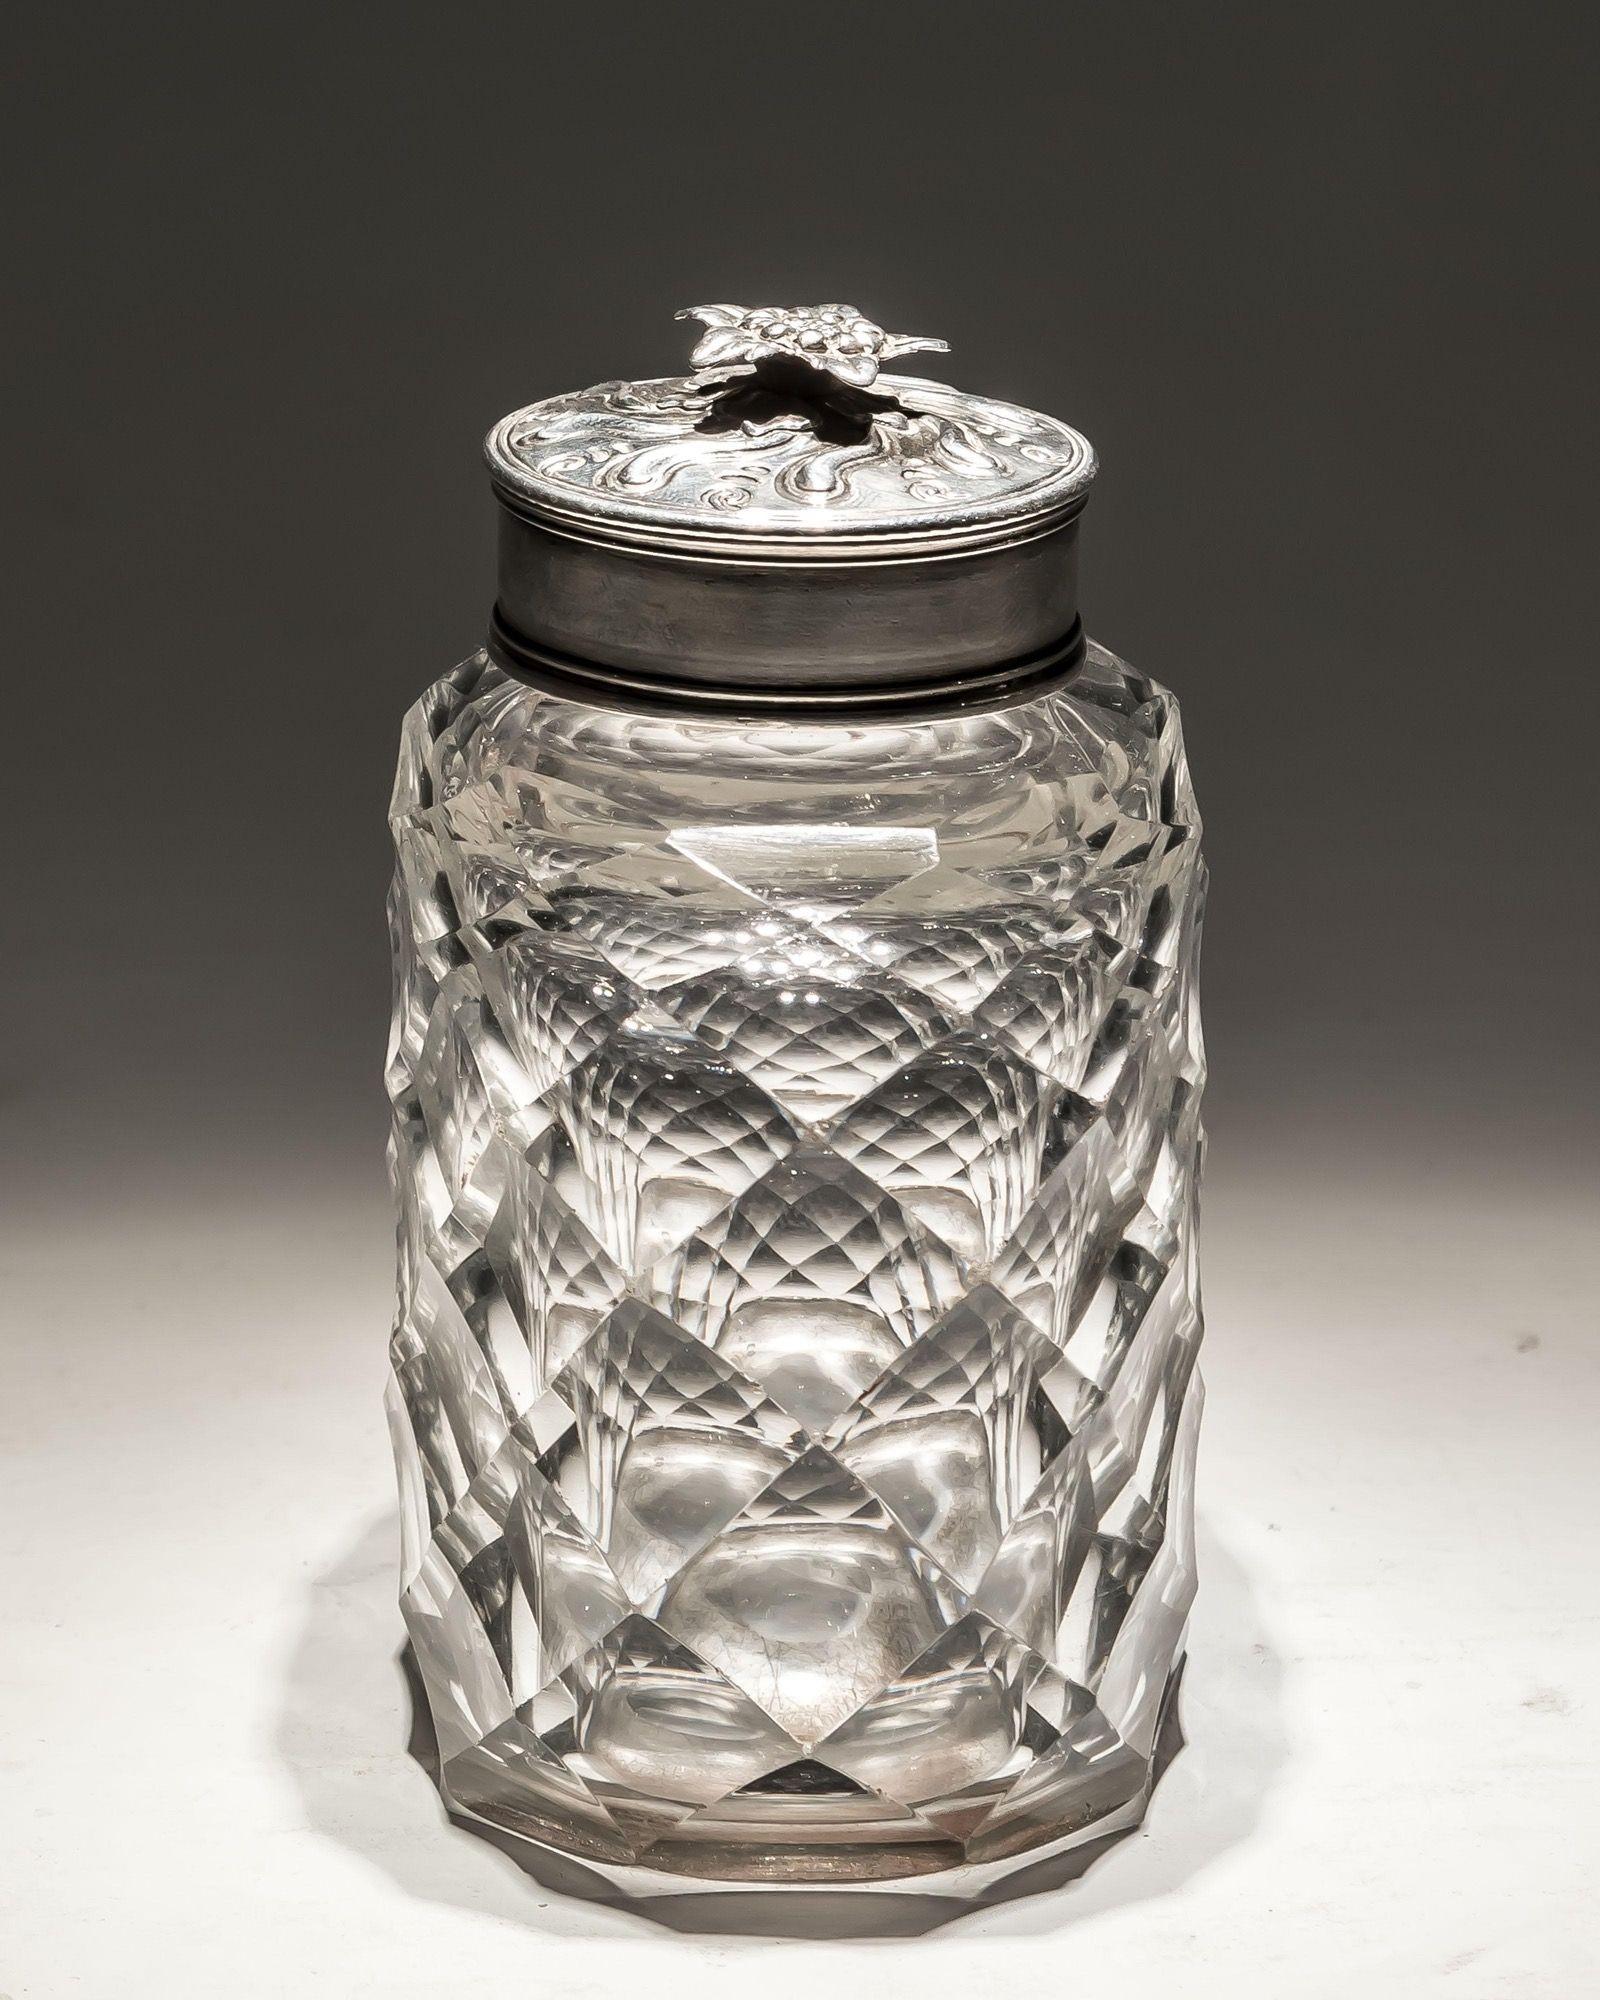 A flat diamond cut tea caddy with silver mount and decorated cap.